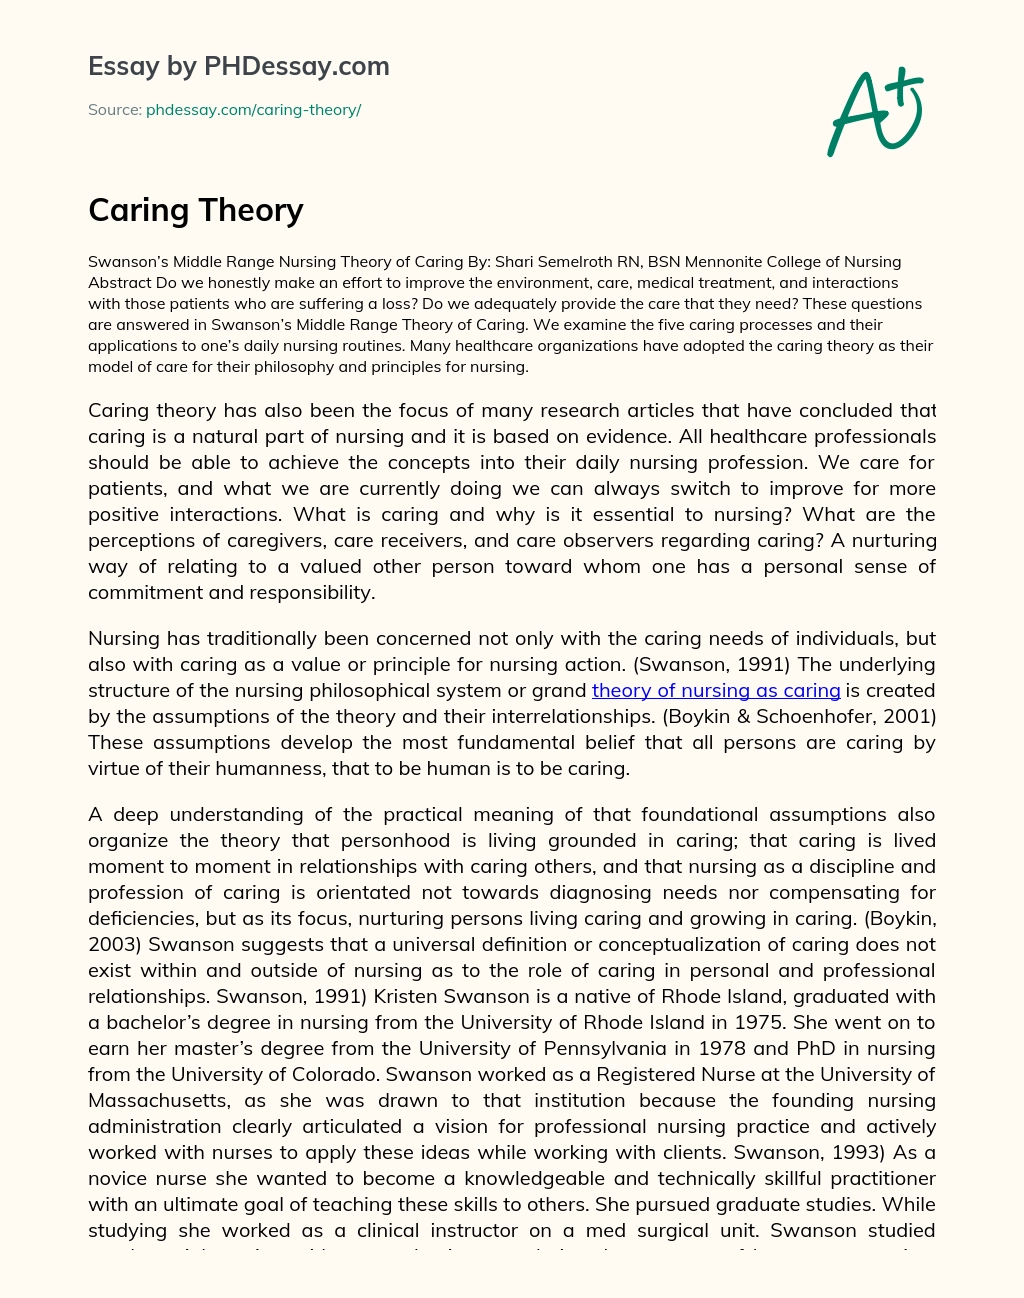 Swanson’s Middle Range Theory of Caring essay